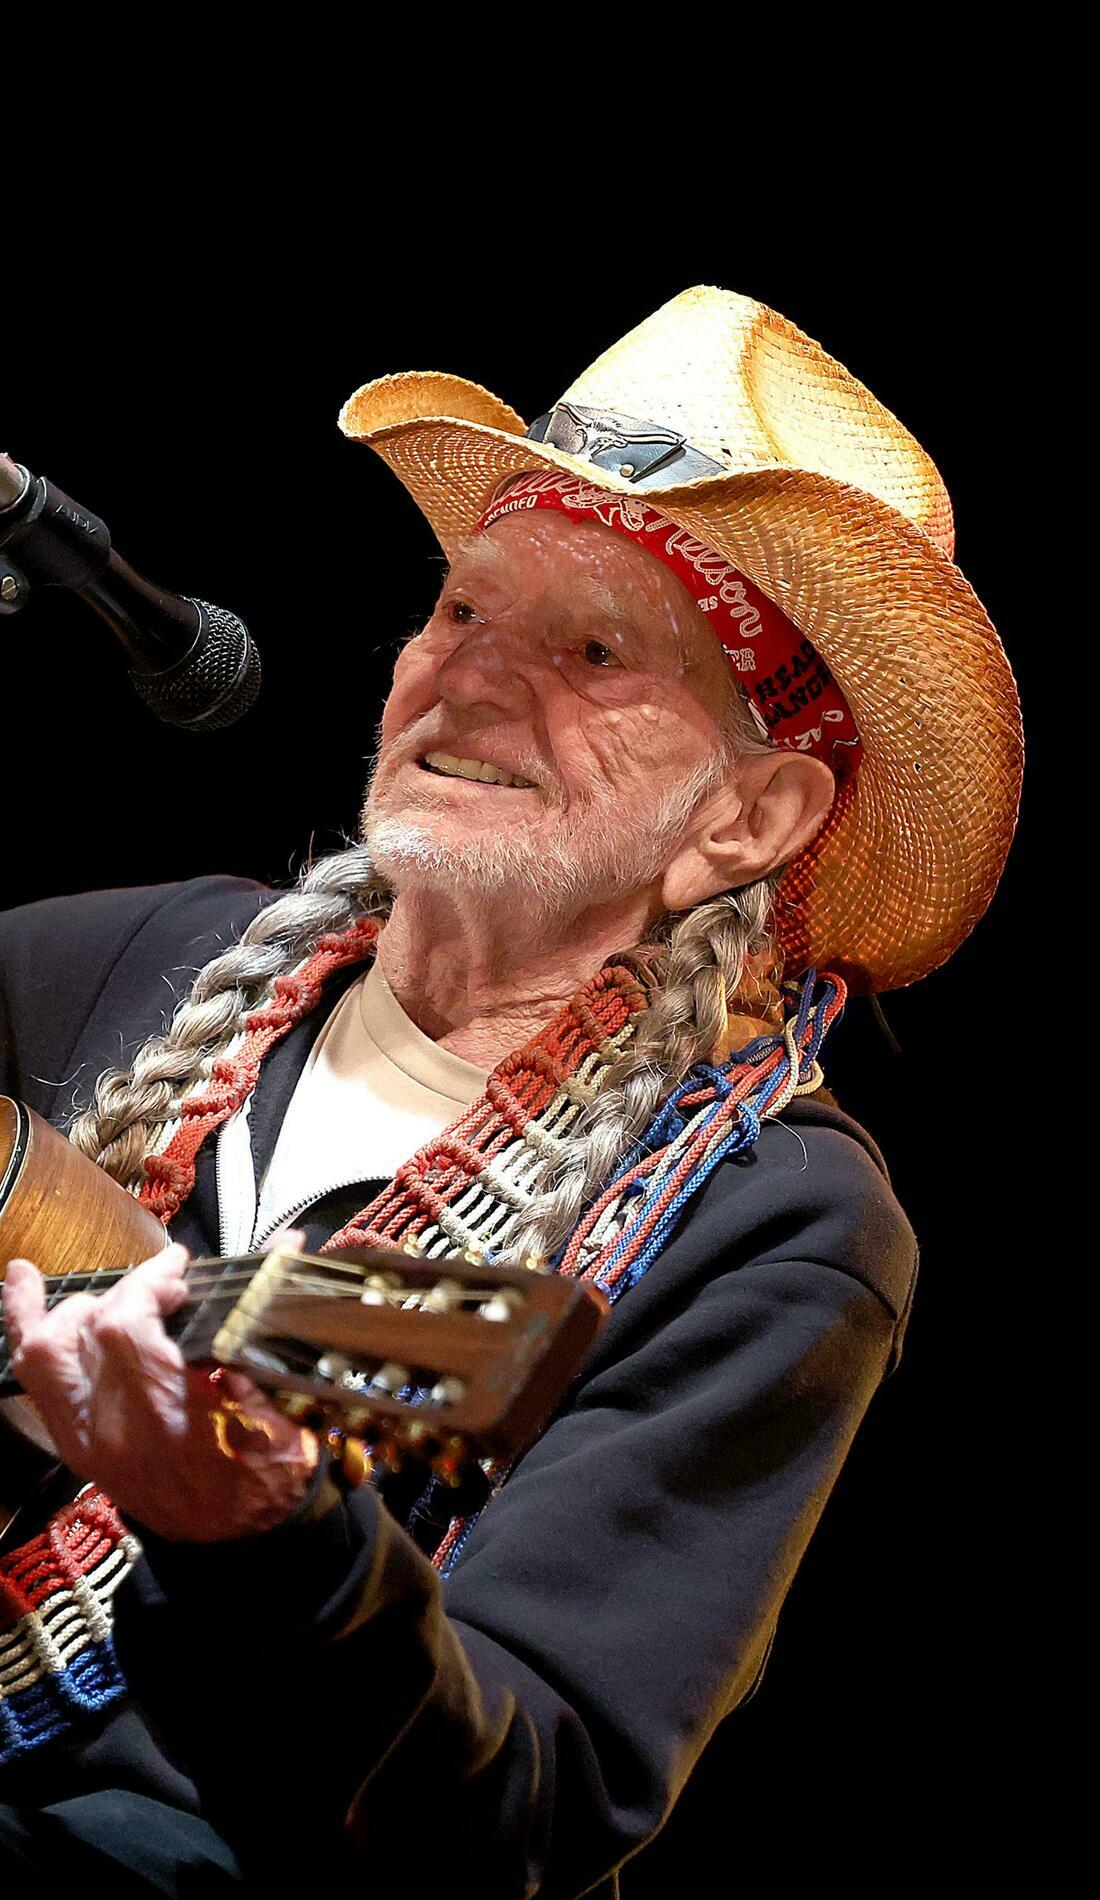 A Willie Nelson & Family live event